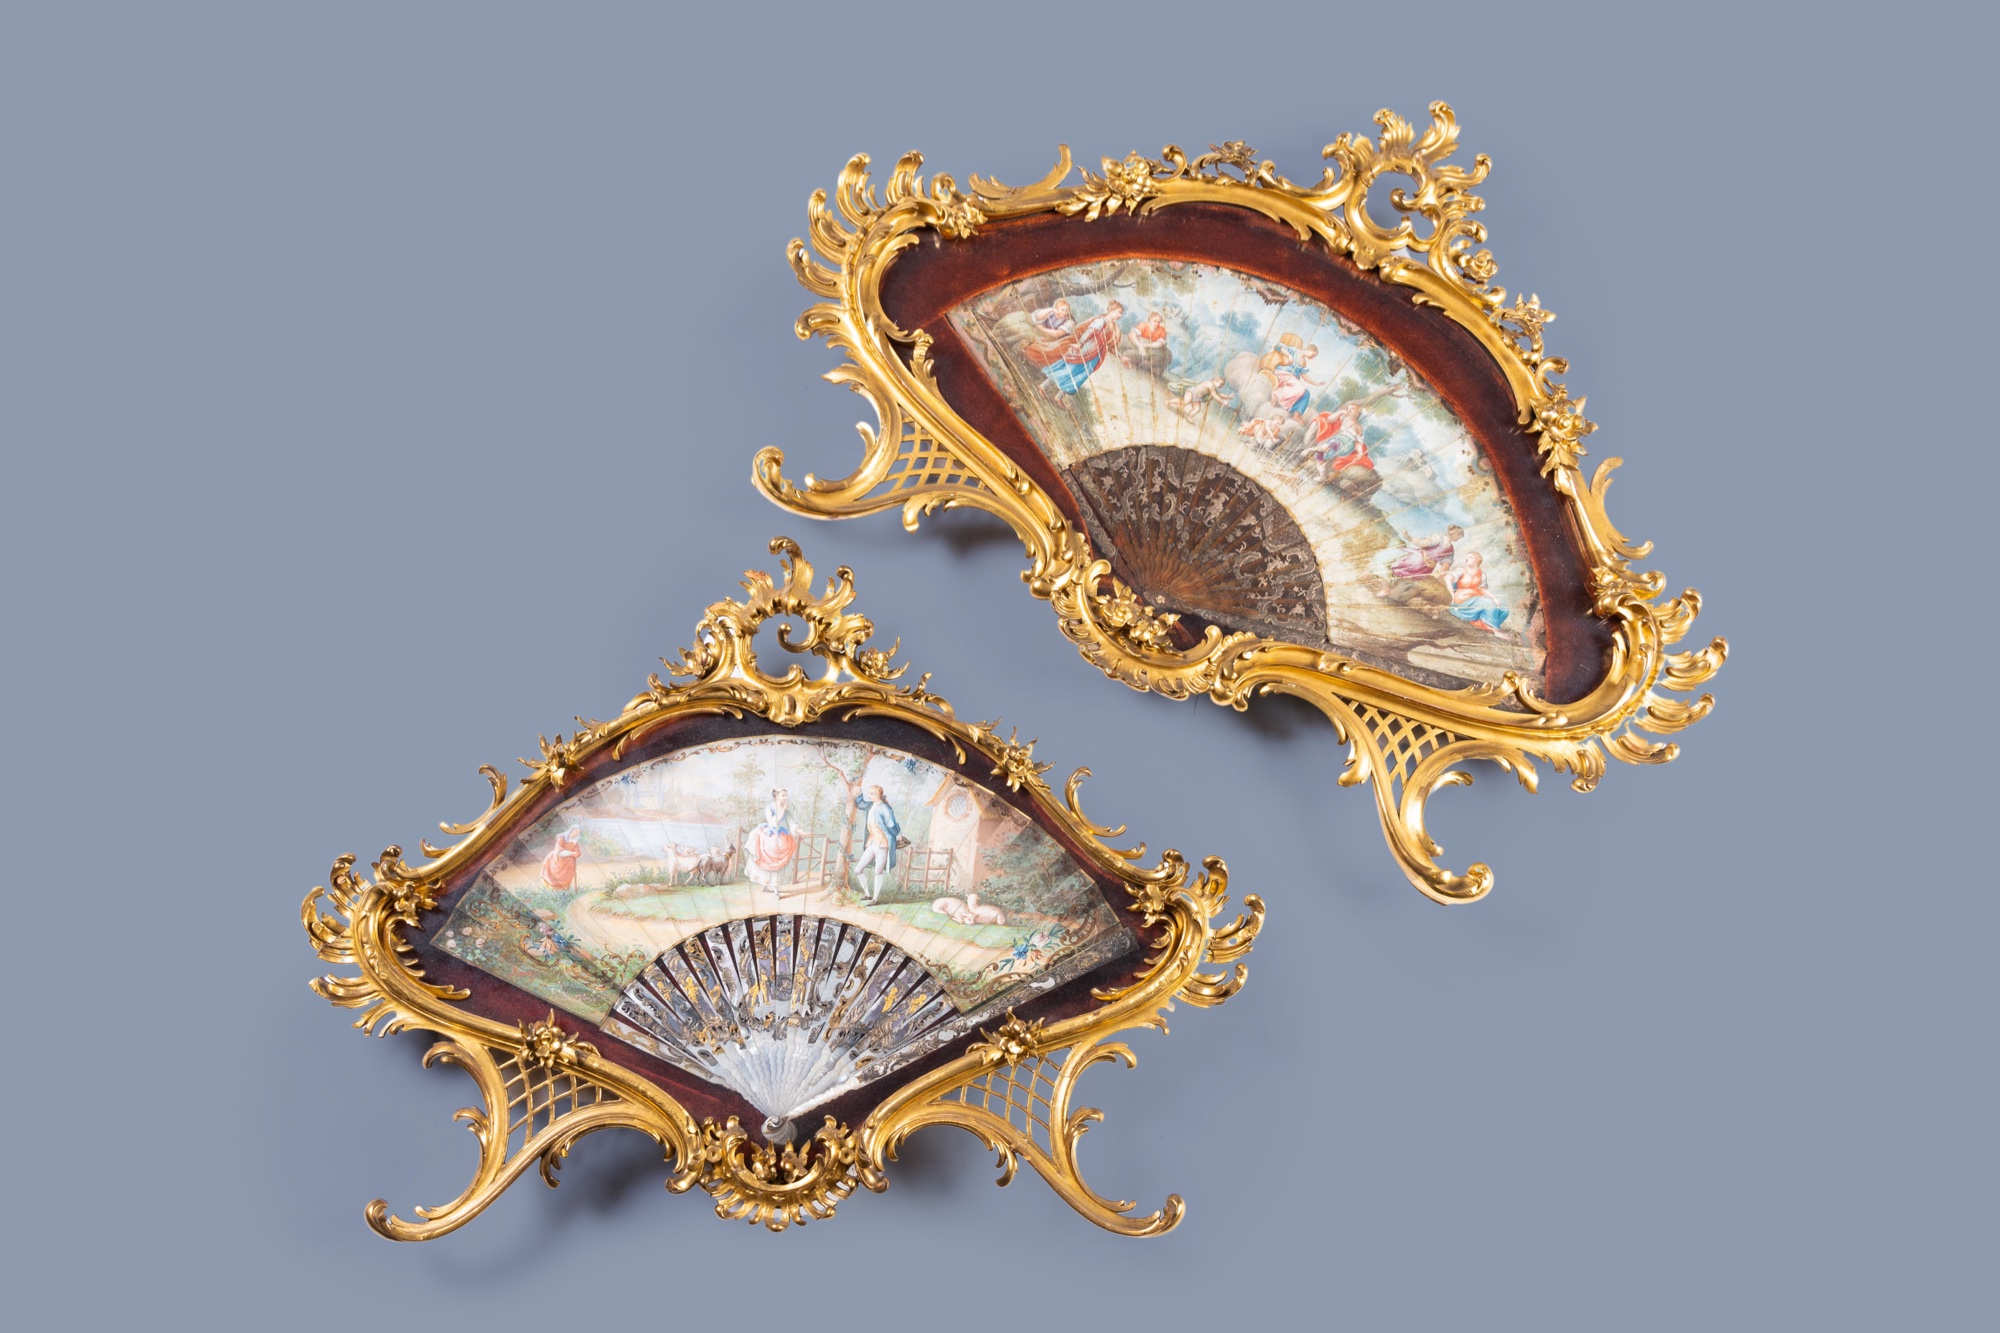 Two finely finished and painted mother-of-pearl, tortoiseshell and silk fans with a gallant scene an